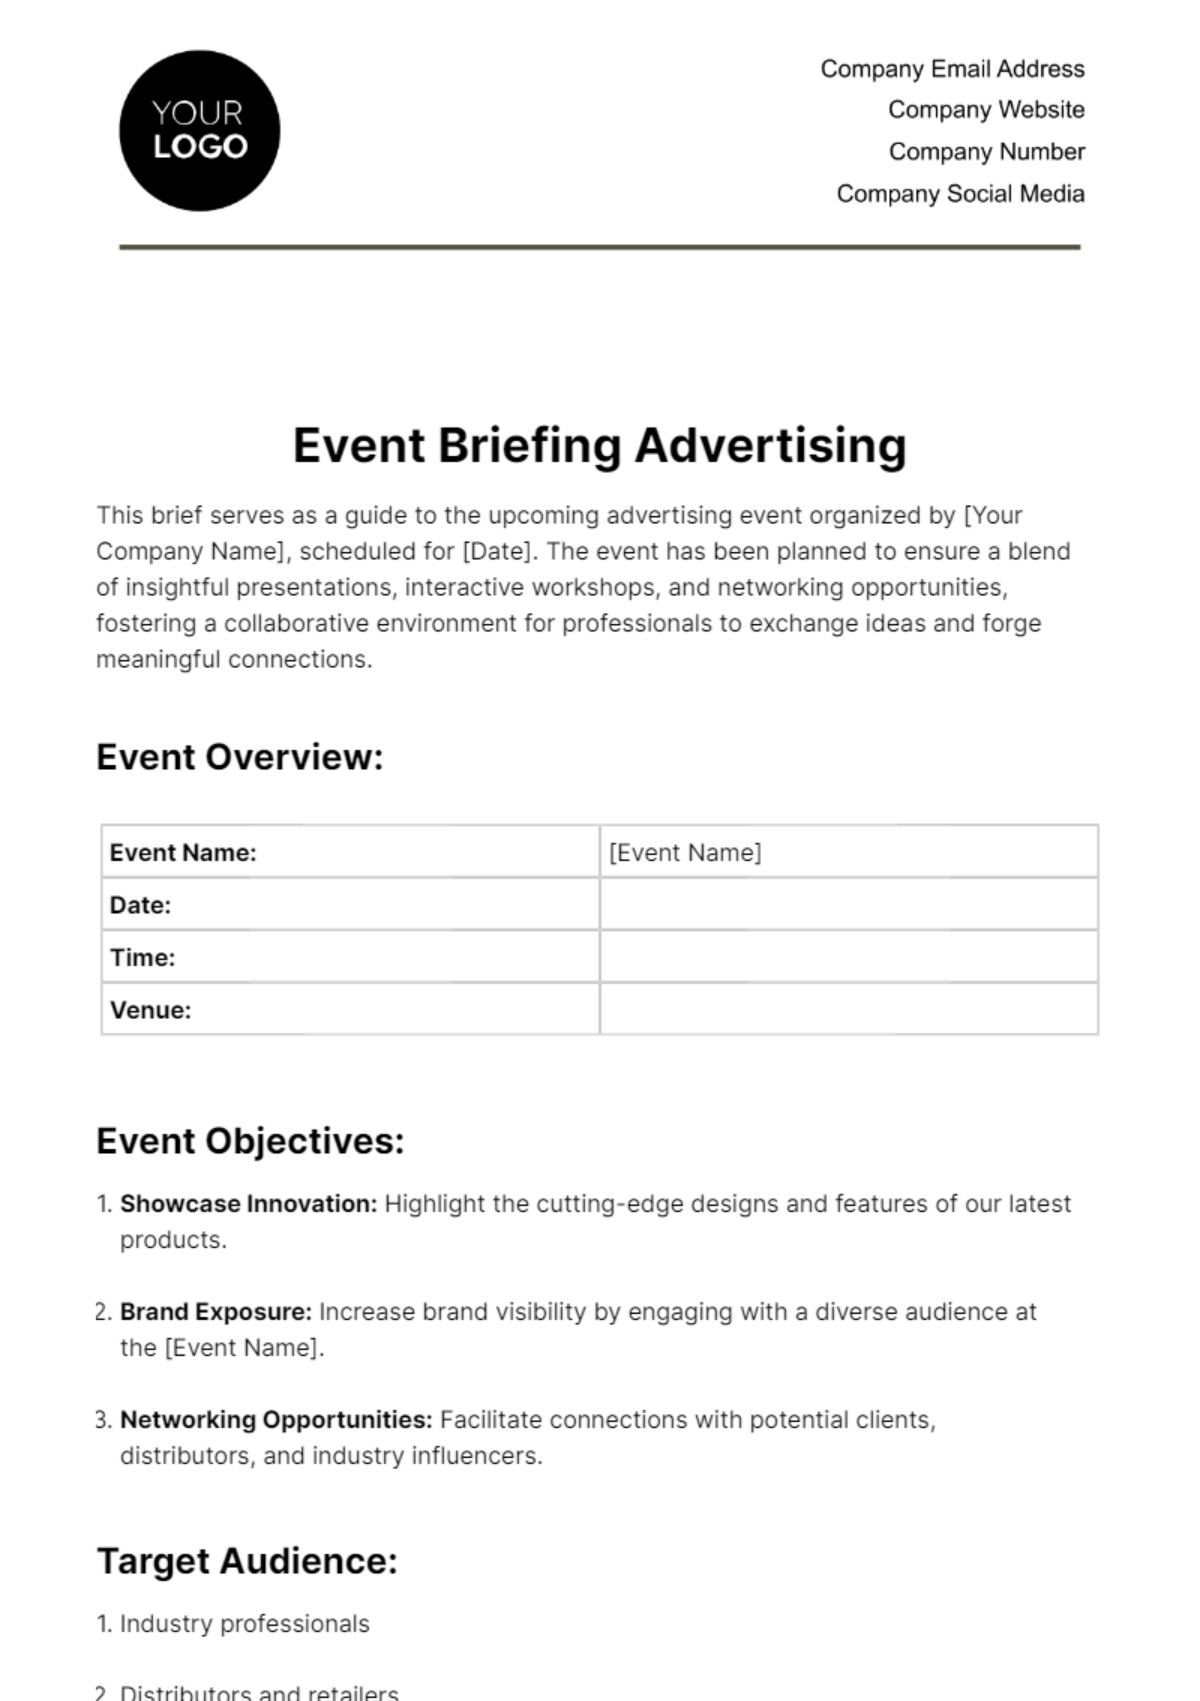 Event Briefing Advertising Template